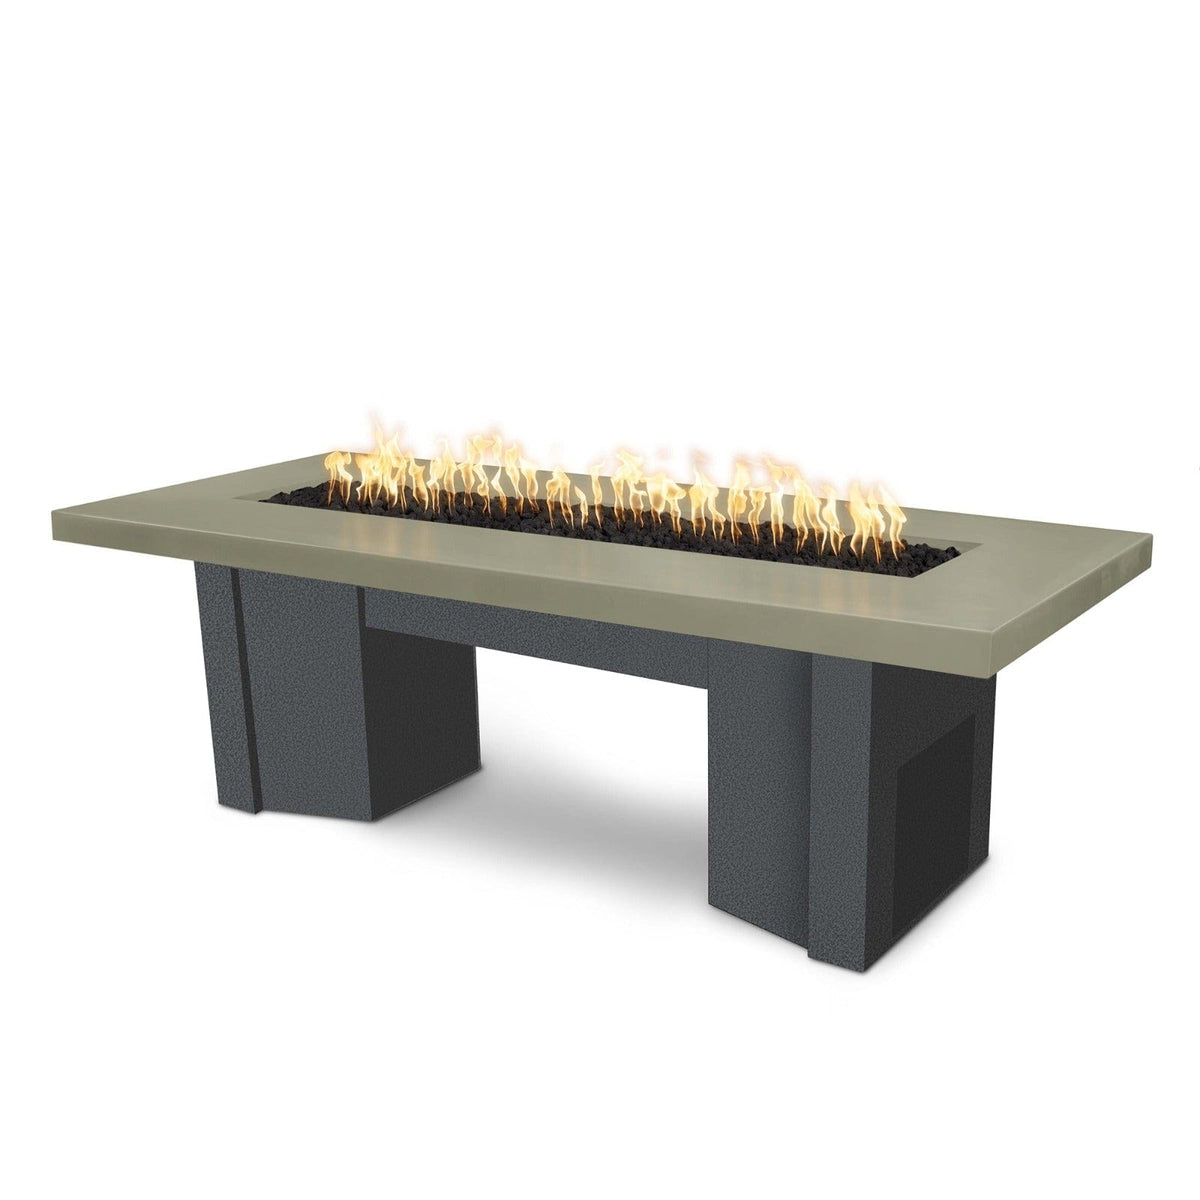 The Outdoor Plus Fire Features Ash (-ASH) / Silver Vein Powder Coated Steel (-SLV) The Outdoor Plus 78&quot; Alameda Fire Table Smooth Concrete in Liquid Propane - Match Lit with Flame Sense System / OPT-ALMGFRC78FSML-LP